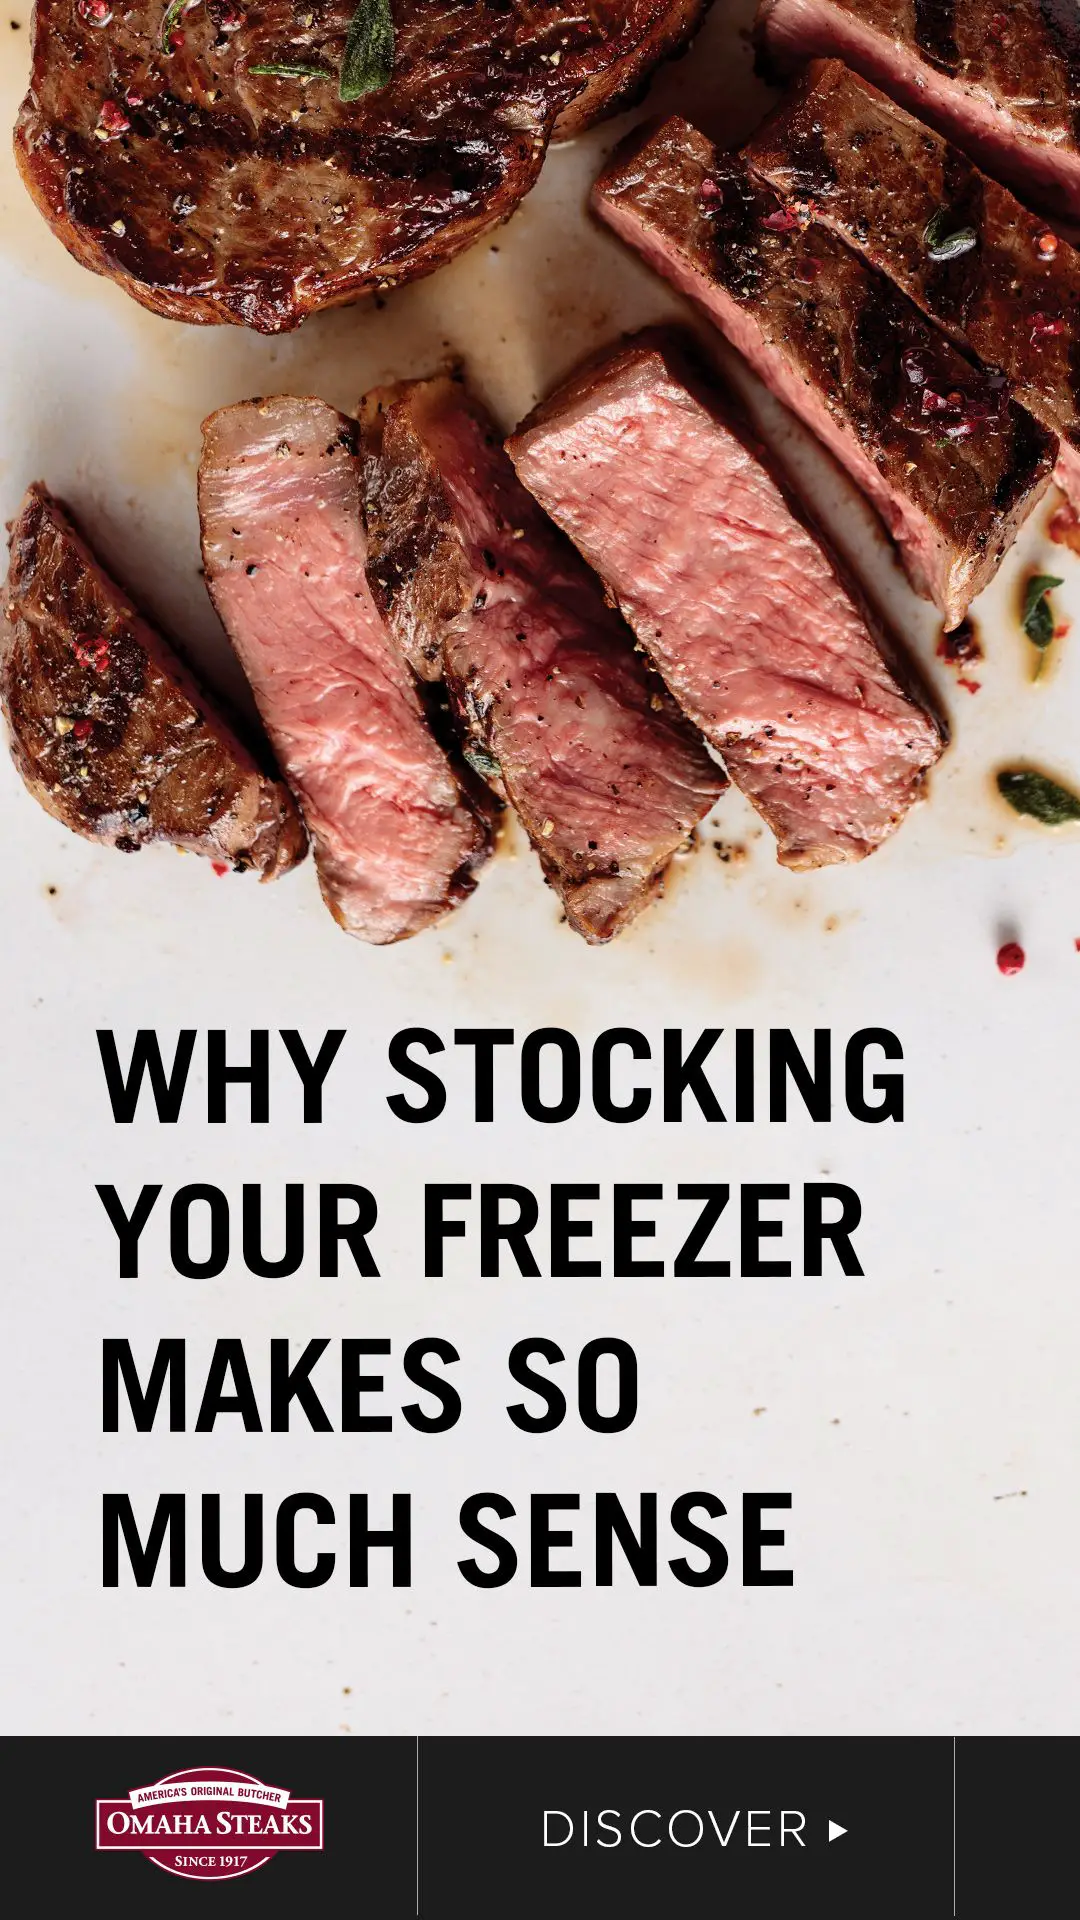 Why Stocking Your Freezer with Omaha Steaks Makes So Much ...